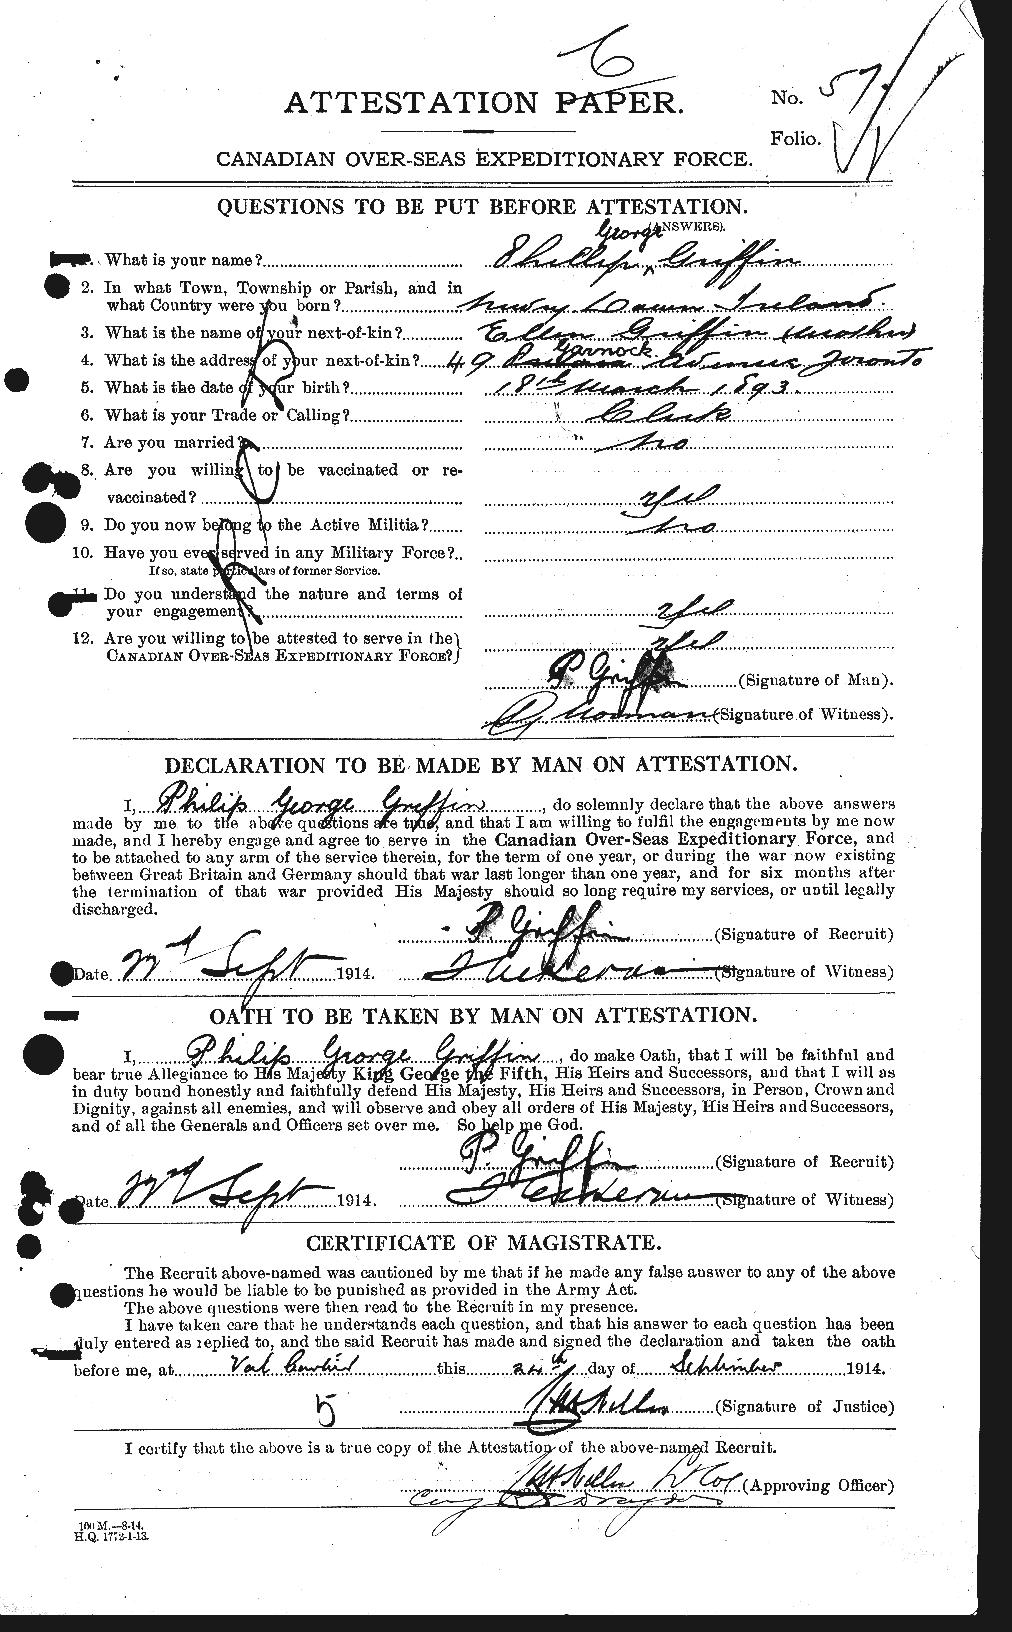 Personnel Records of the First World War - CEF 366395a